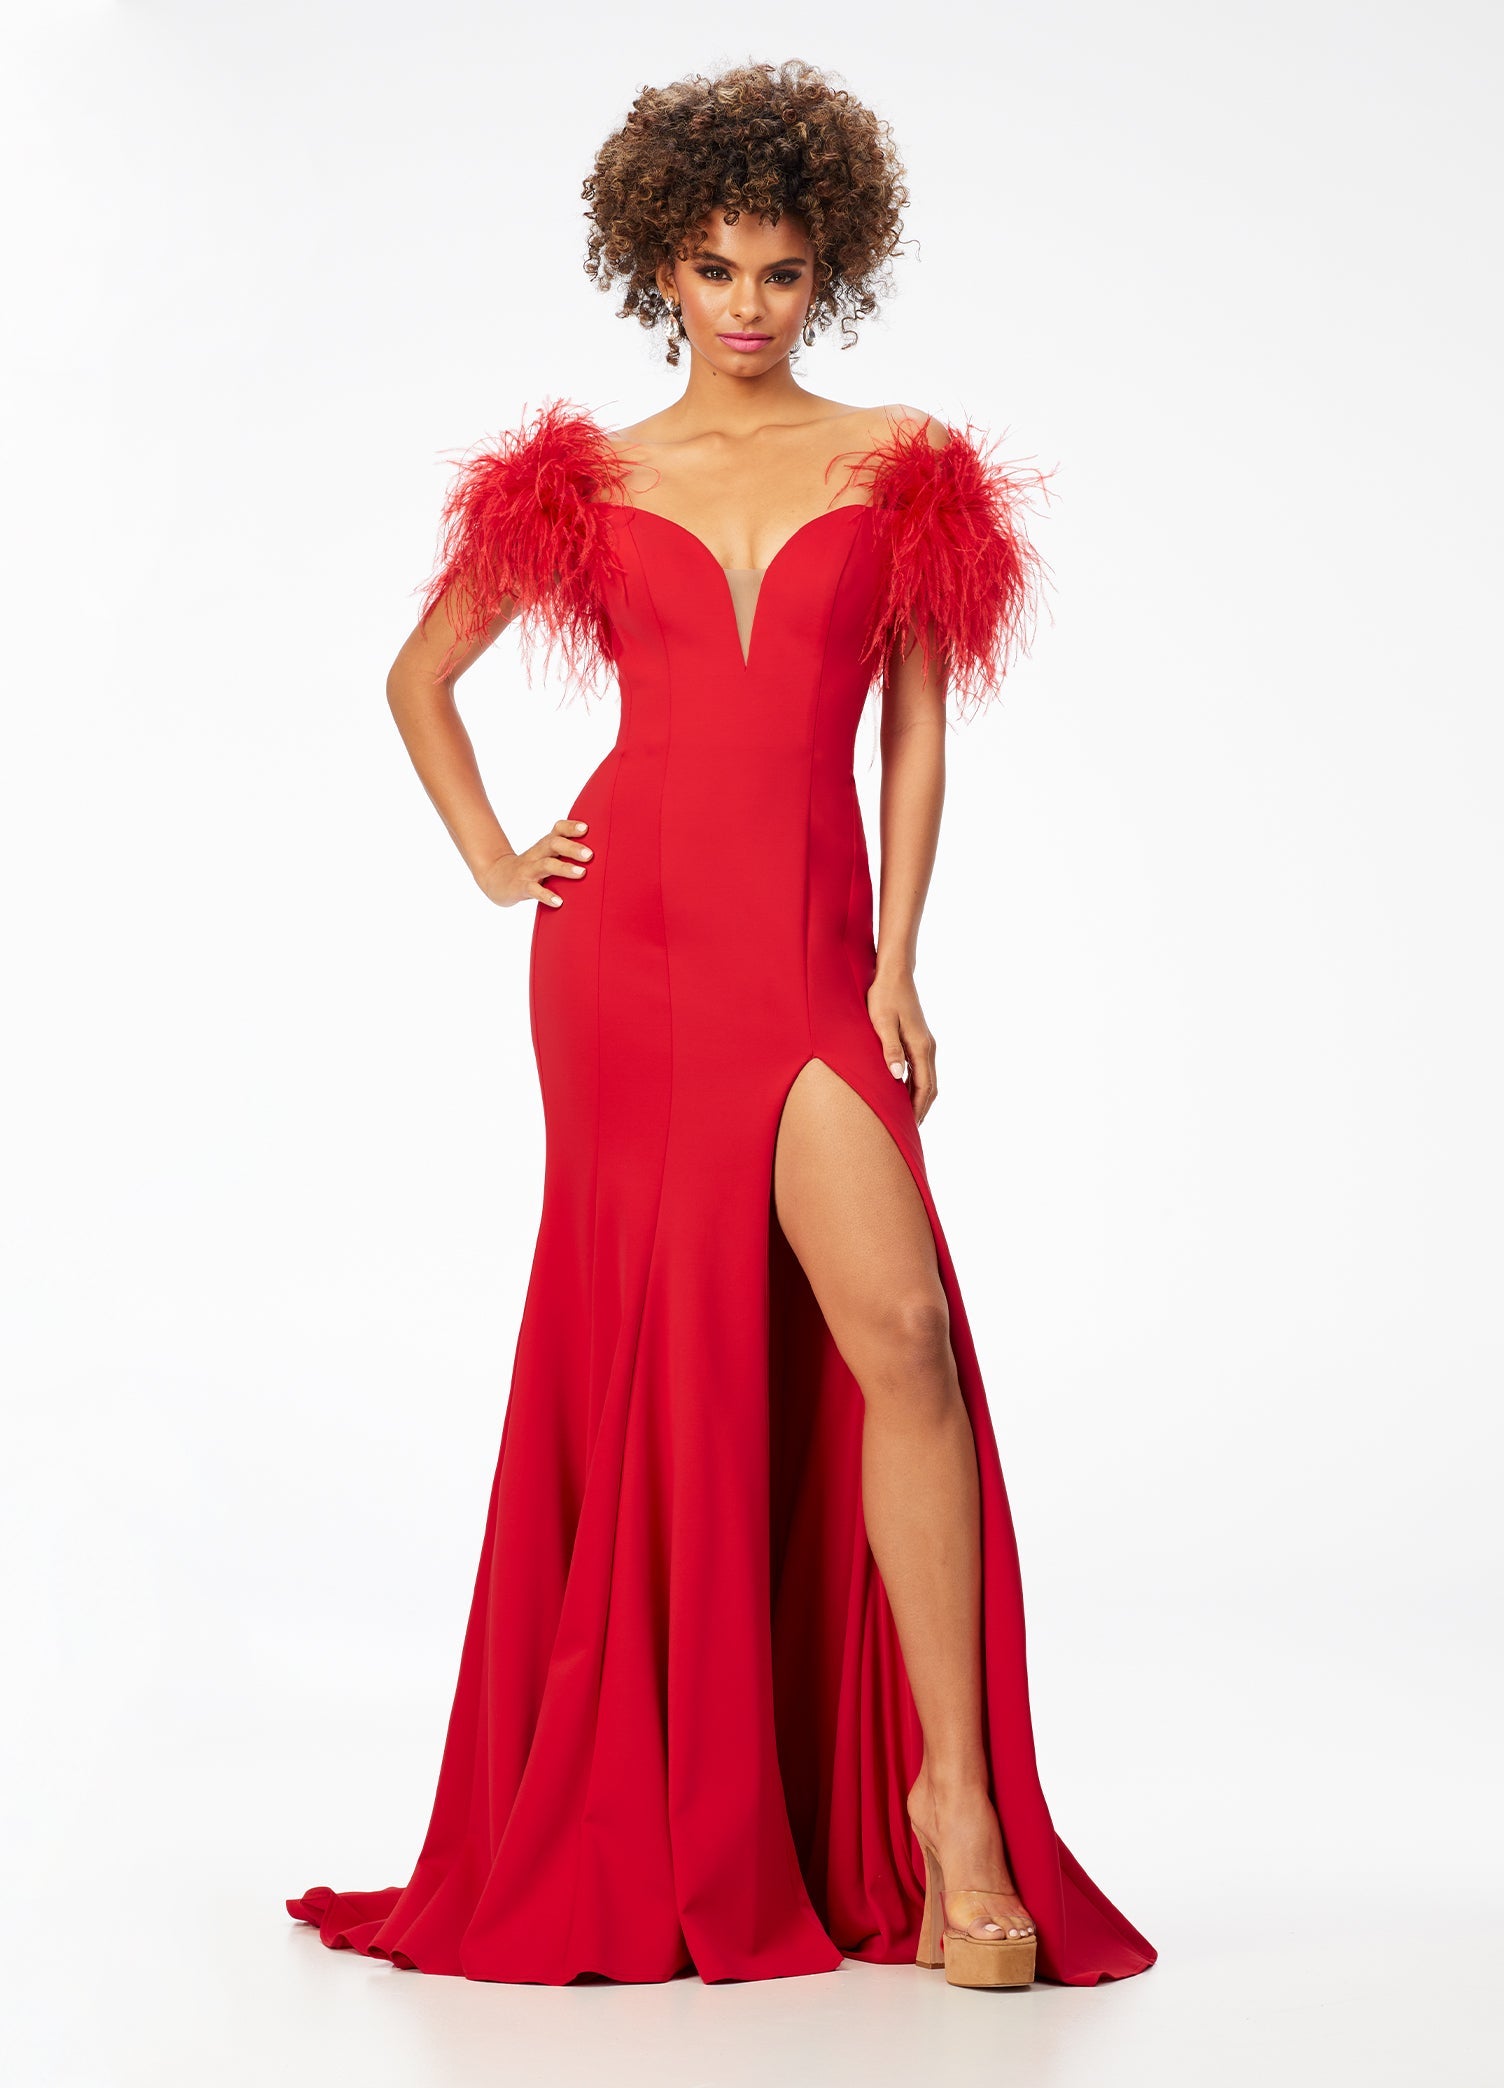 Ashley Lauren 11100 Feather trimmed Jumpsuit. This jumpsuit features a feather boa wrapped around your neckline, arms and back.  The fabric is scuba and it has flare in the pant leg.